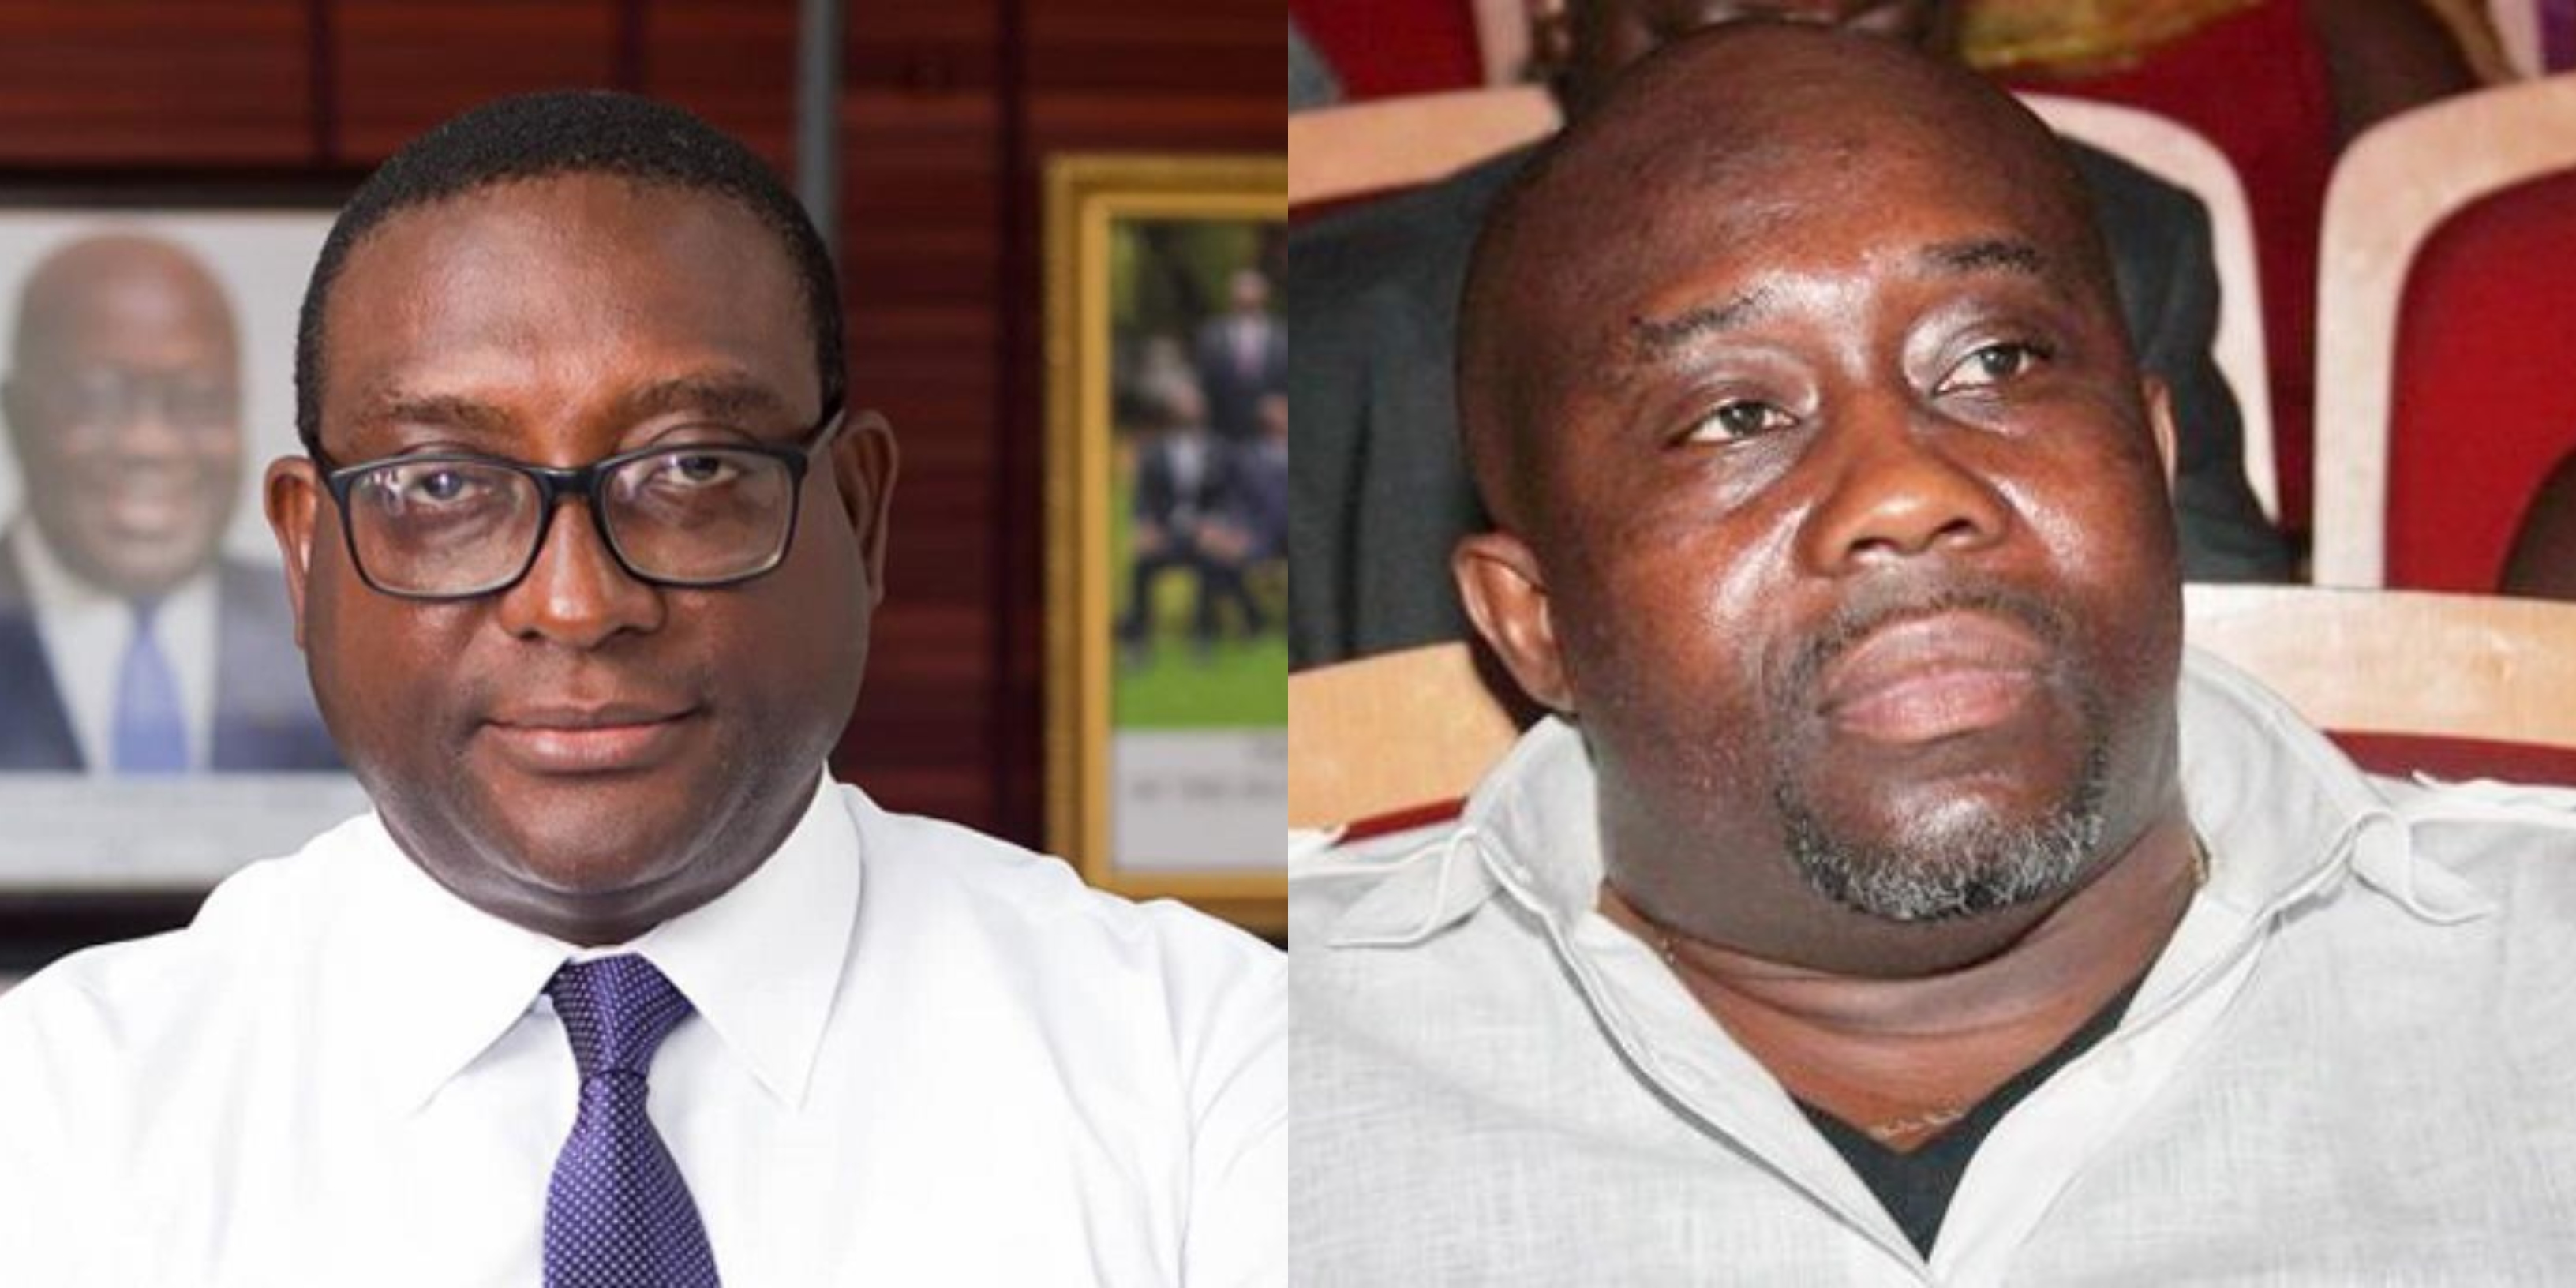 Election 2020: Yaw Buaben Asamoah, others lose their seats to NDC candidates